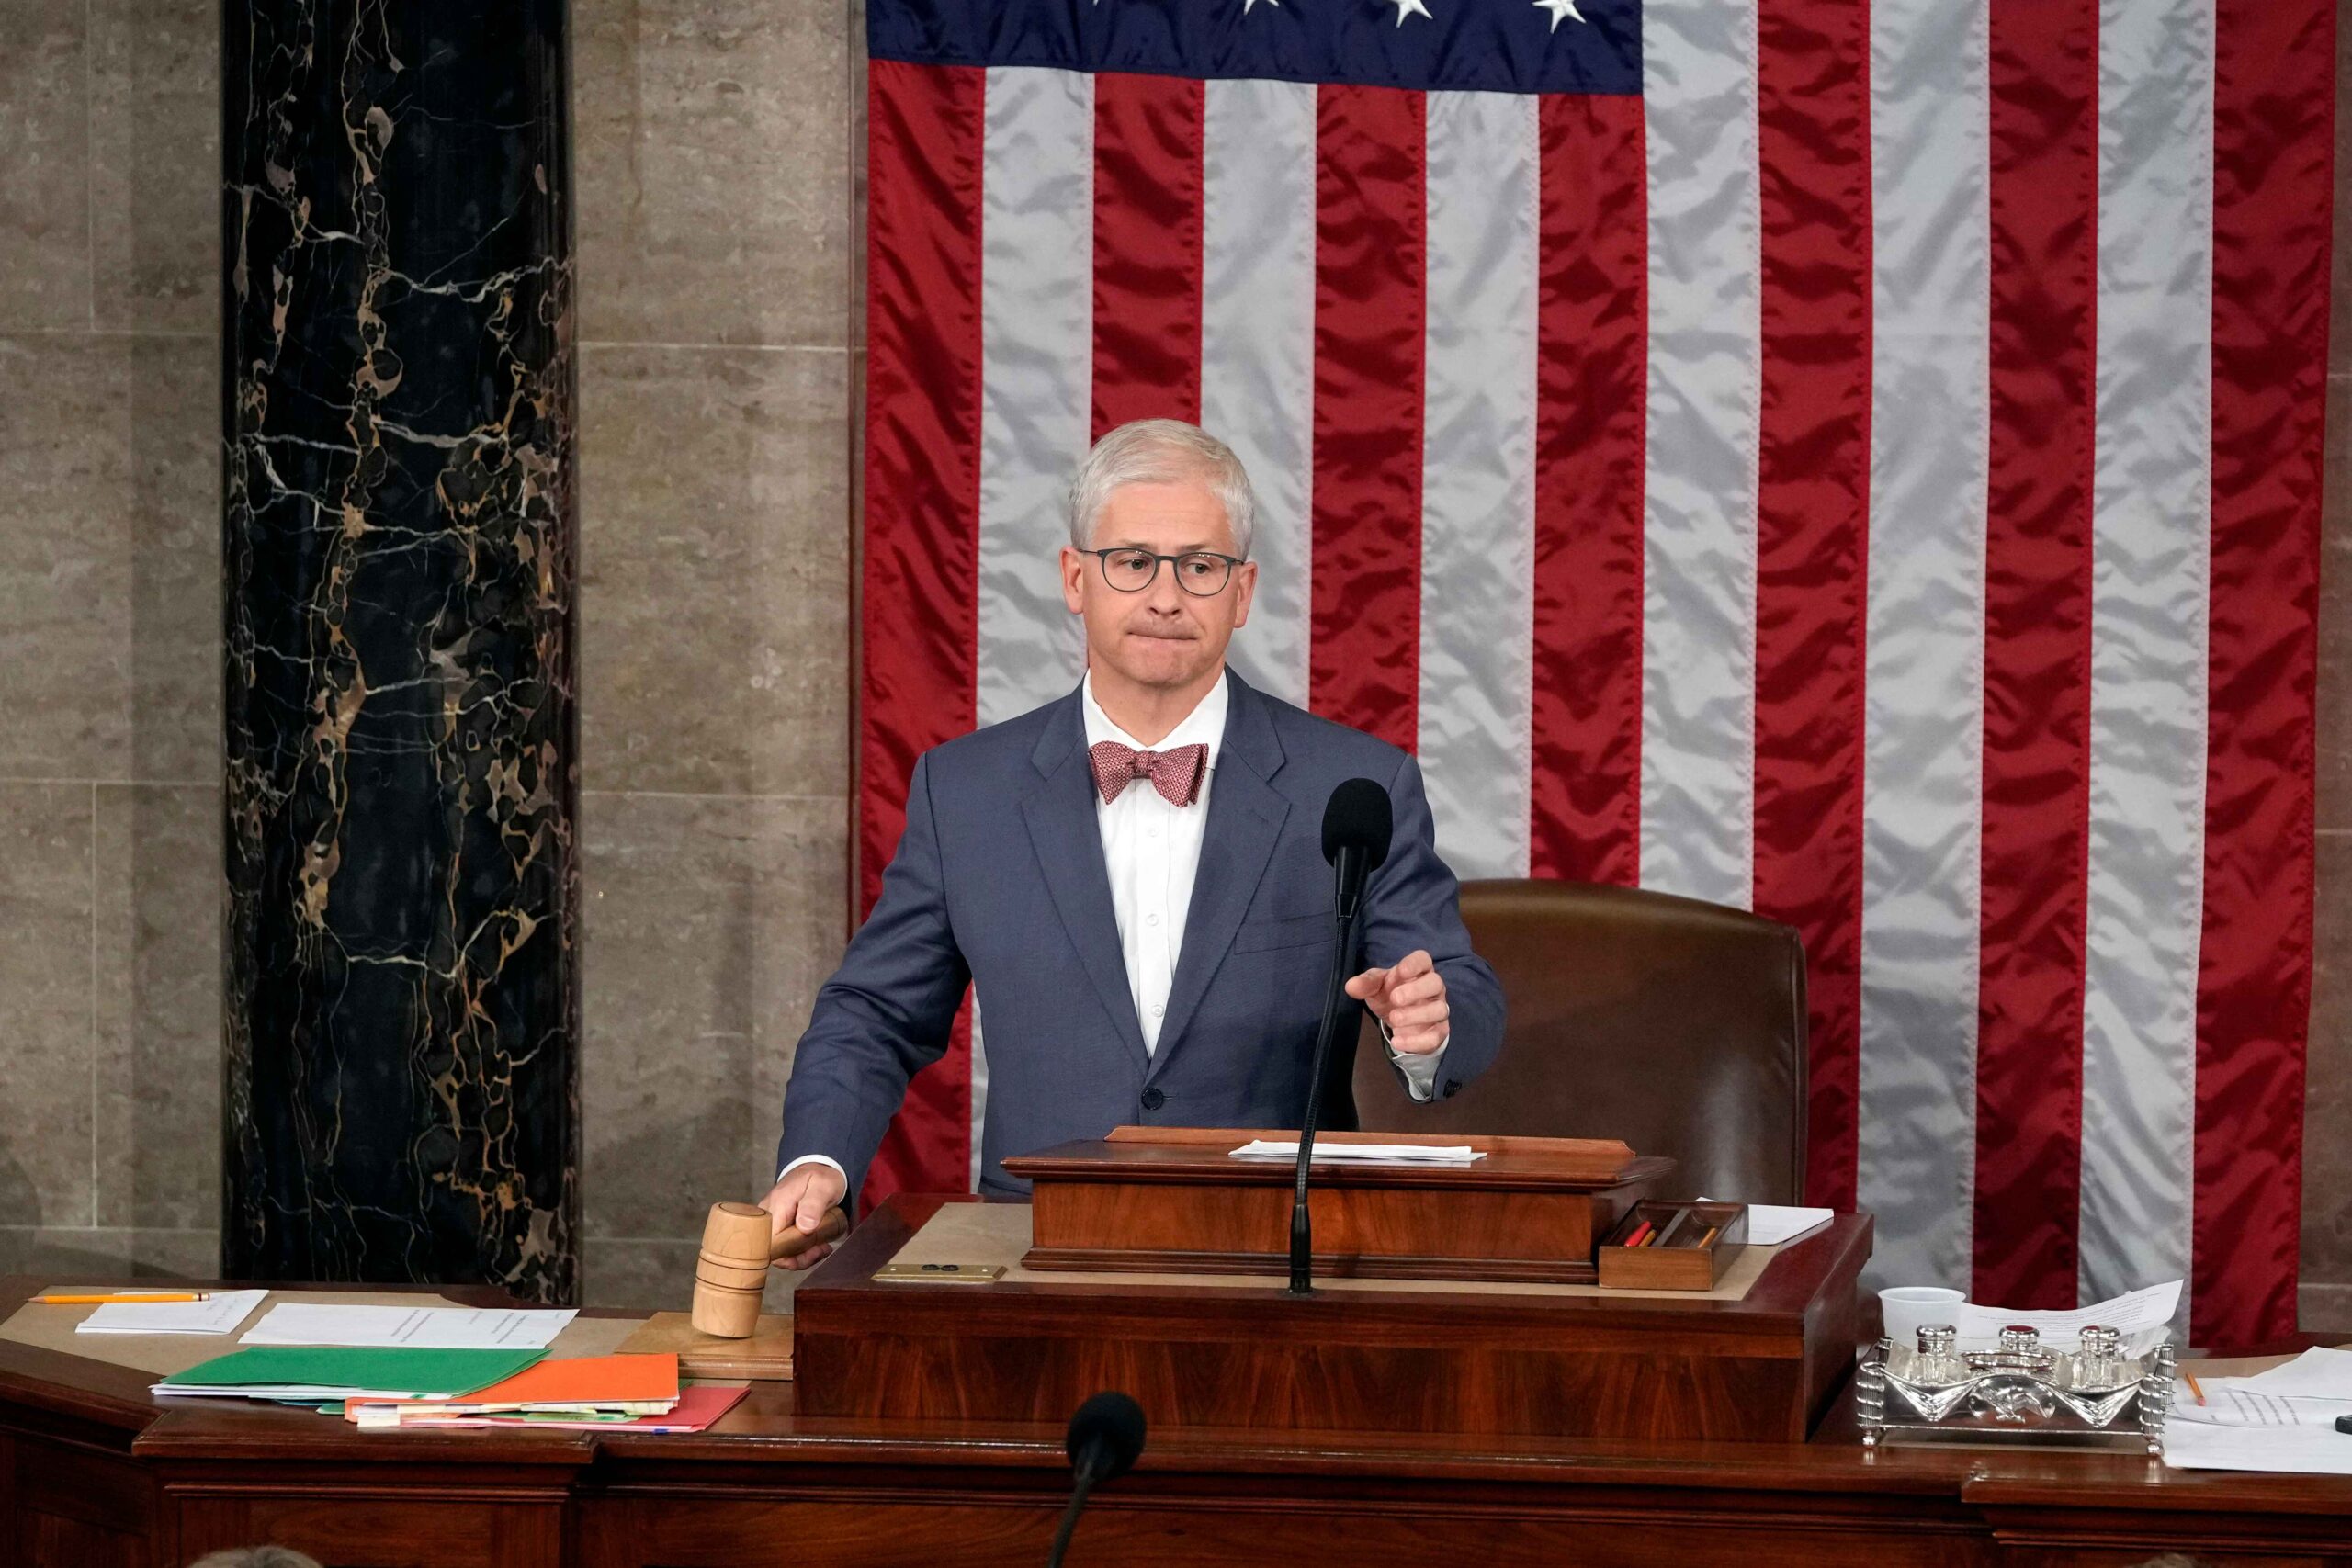 Republicans moved to temporarily empower Patrick McHenry Speaker of the House after nominee Jim Jordan was unsuccessful in a second vote, but the motion failed. (AP Photo/Alex Brandon)